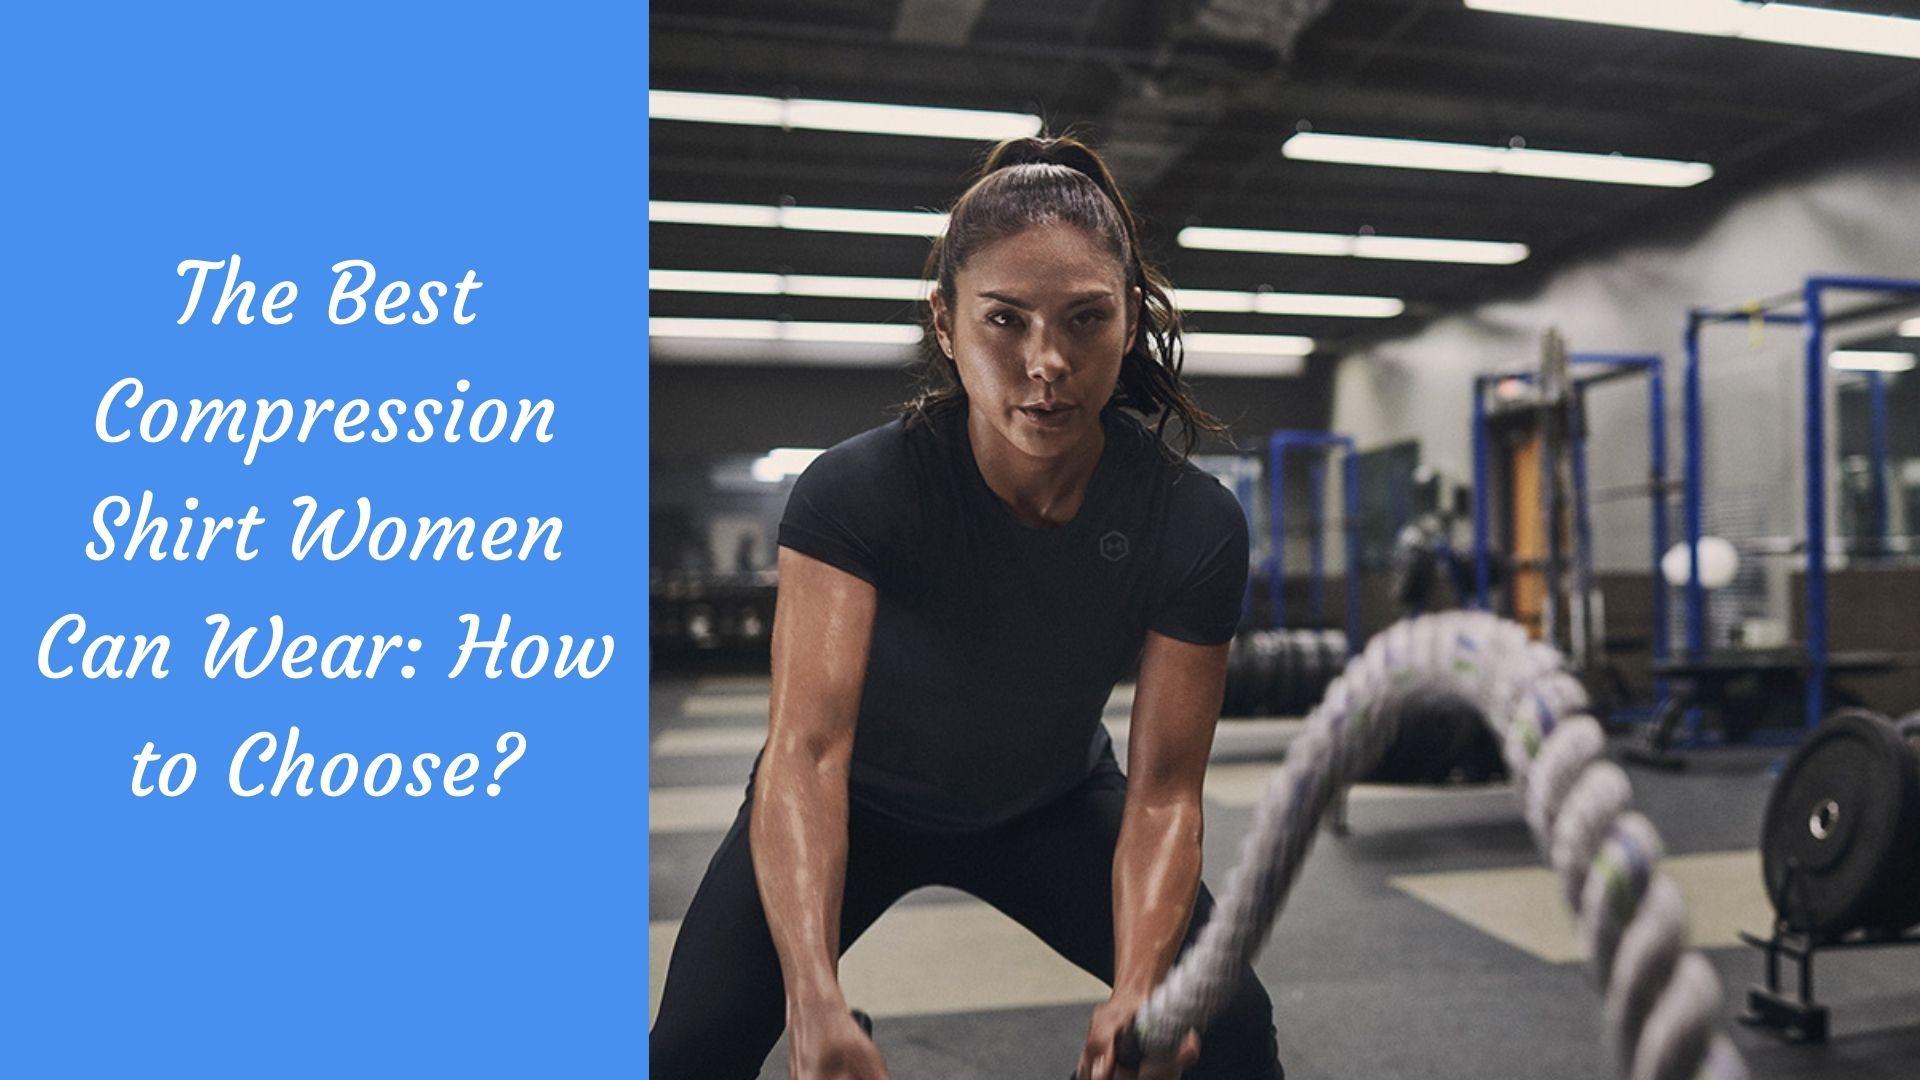 The Best Compression Shirt Women Can Wear: How to Choose? - The Kosha  Journal